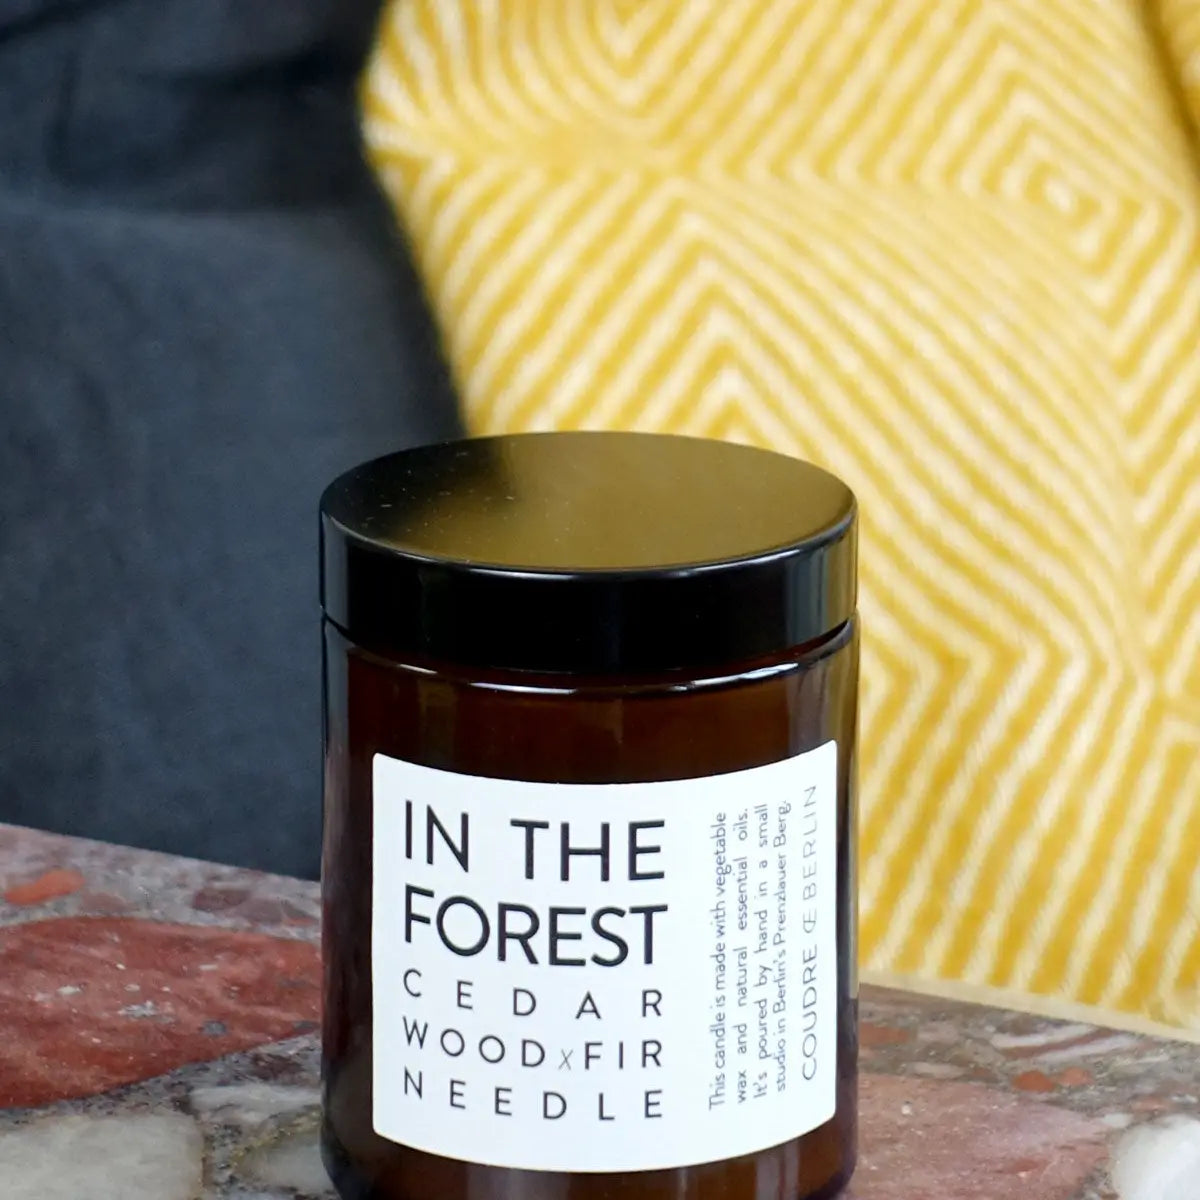 In the Forest Cedarwood X Fir Needle - Essentials Scented Candle